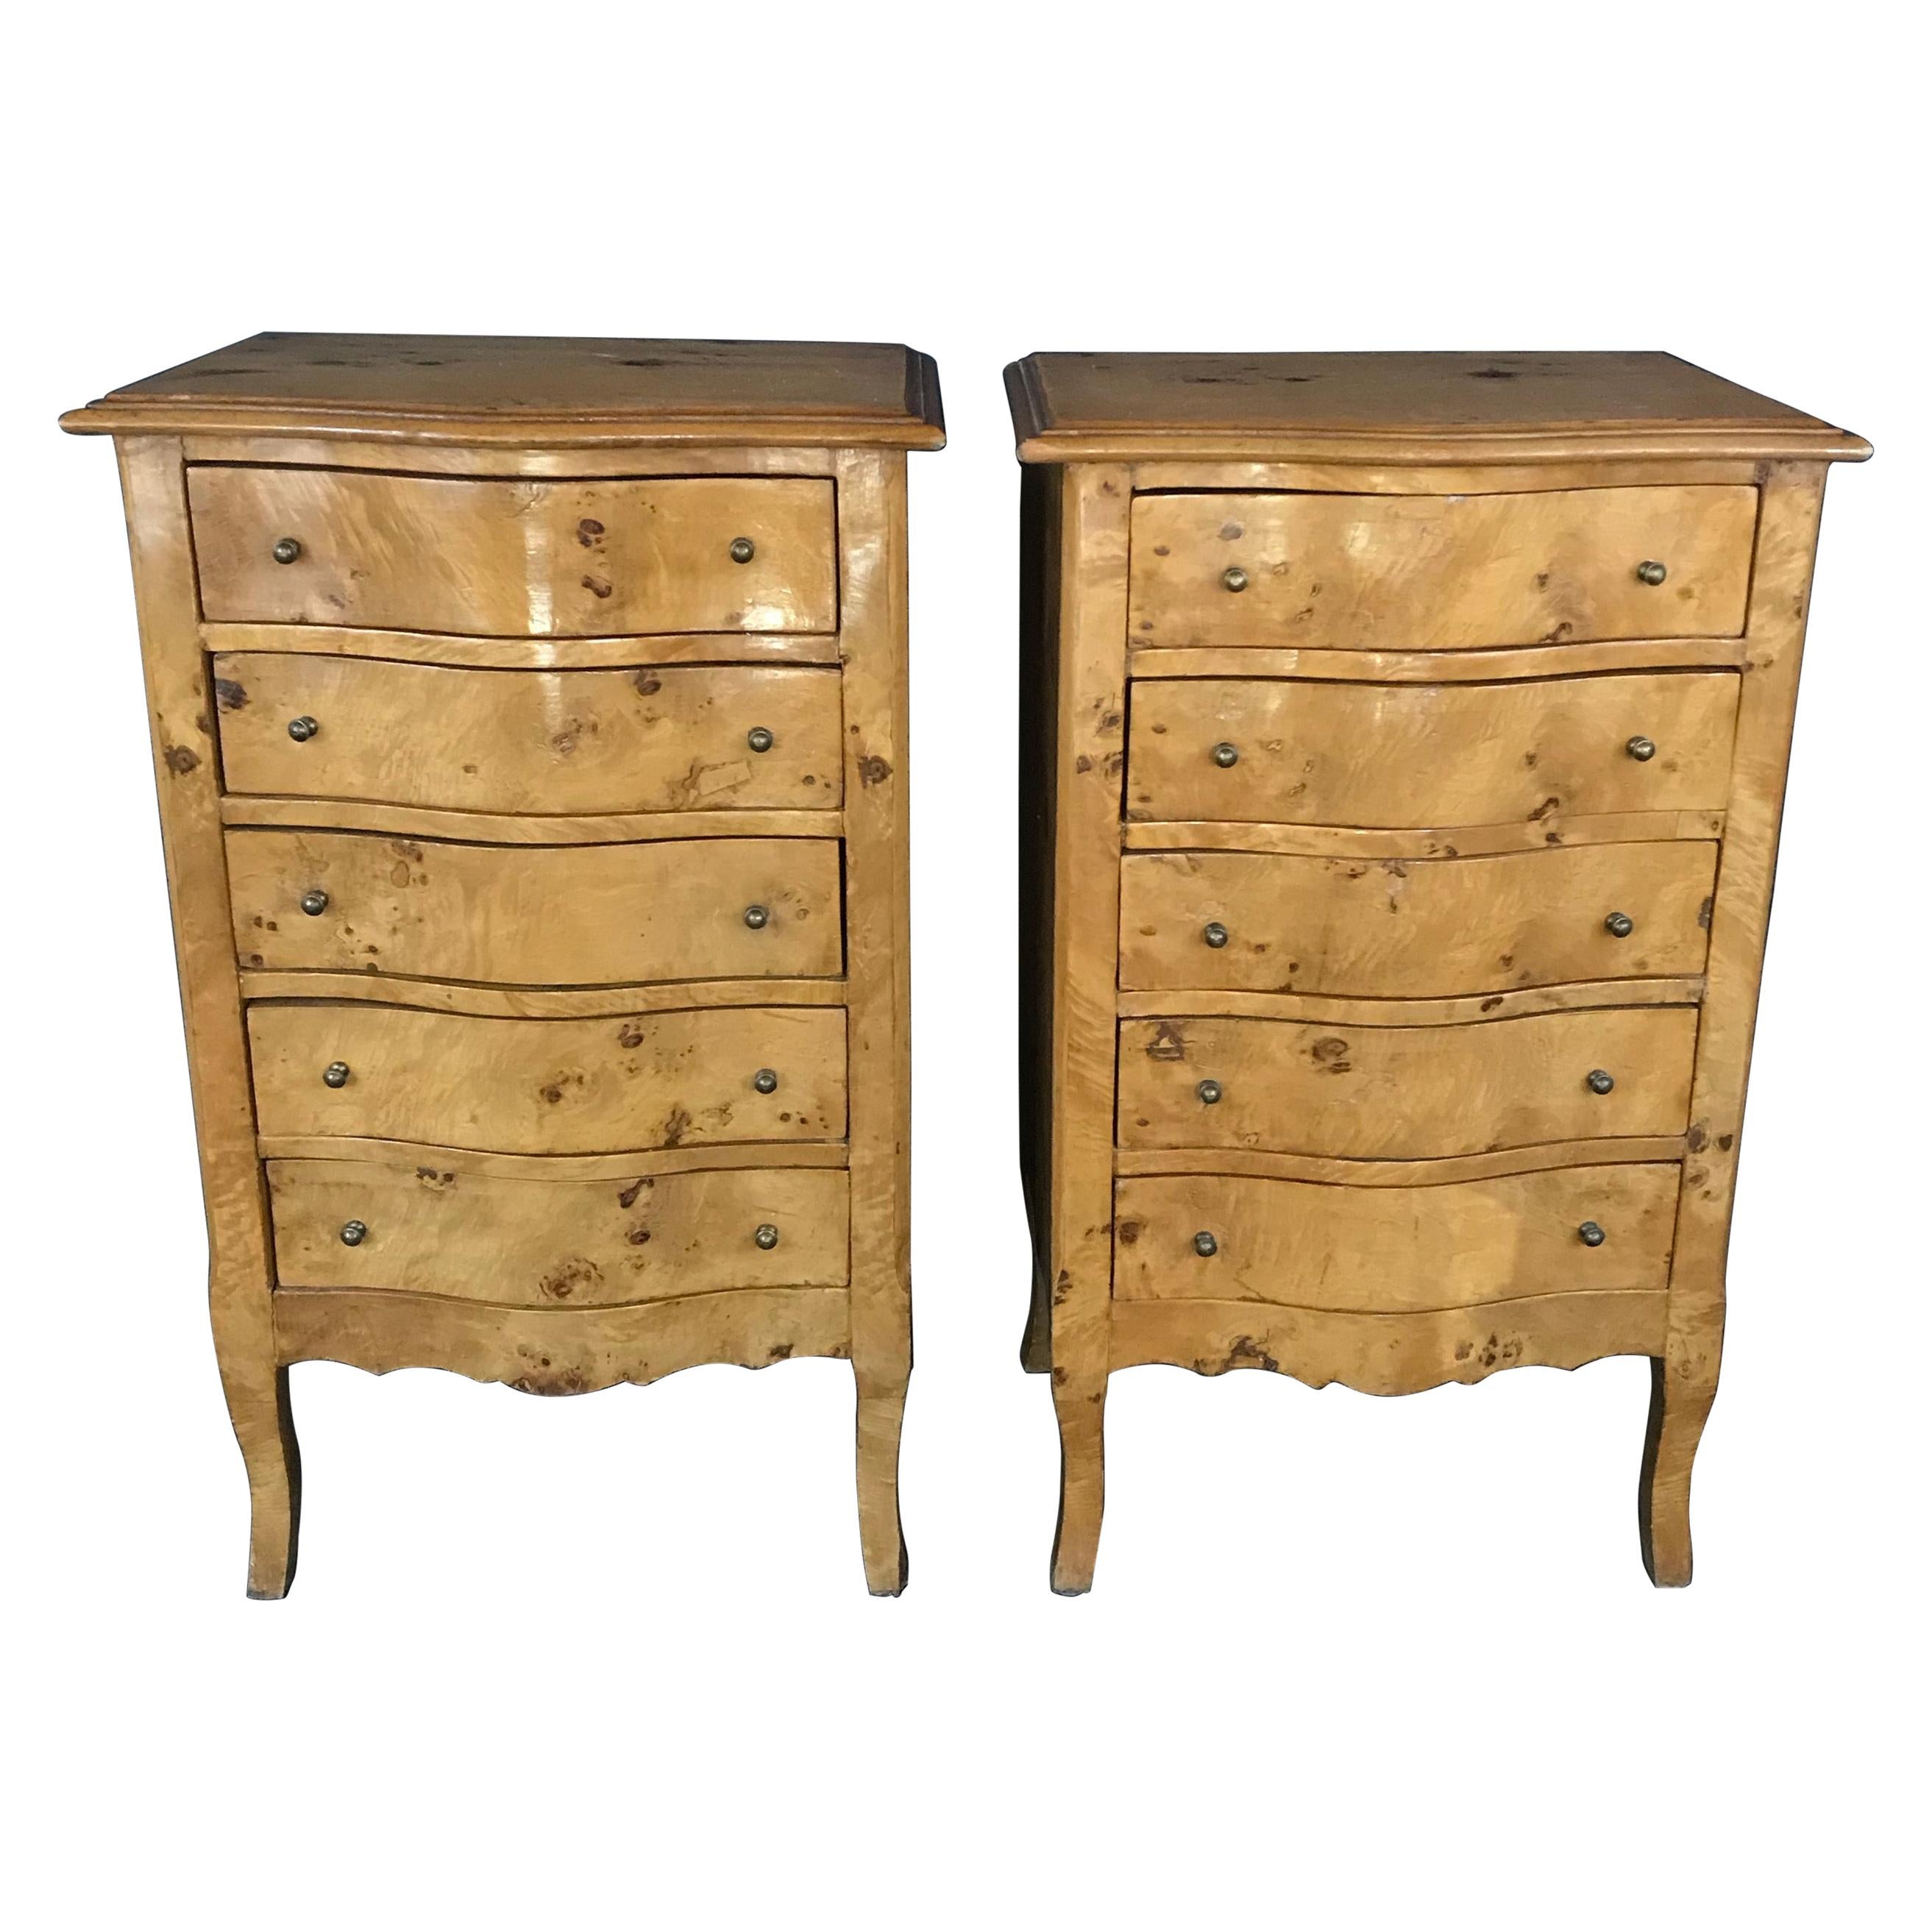 Pair of French Louis XV Burled Walnut or Fruitwood Side Tables or Nightstands